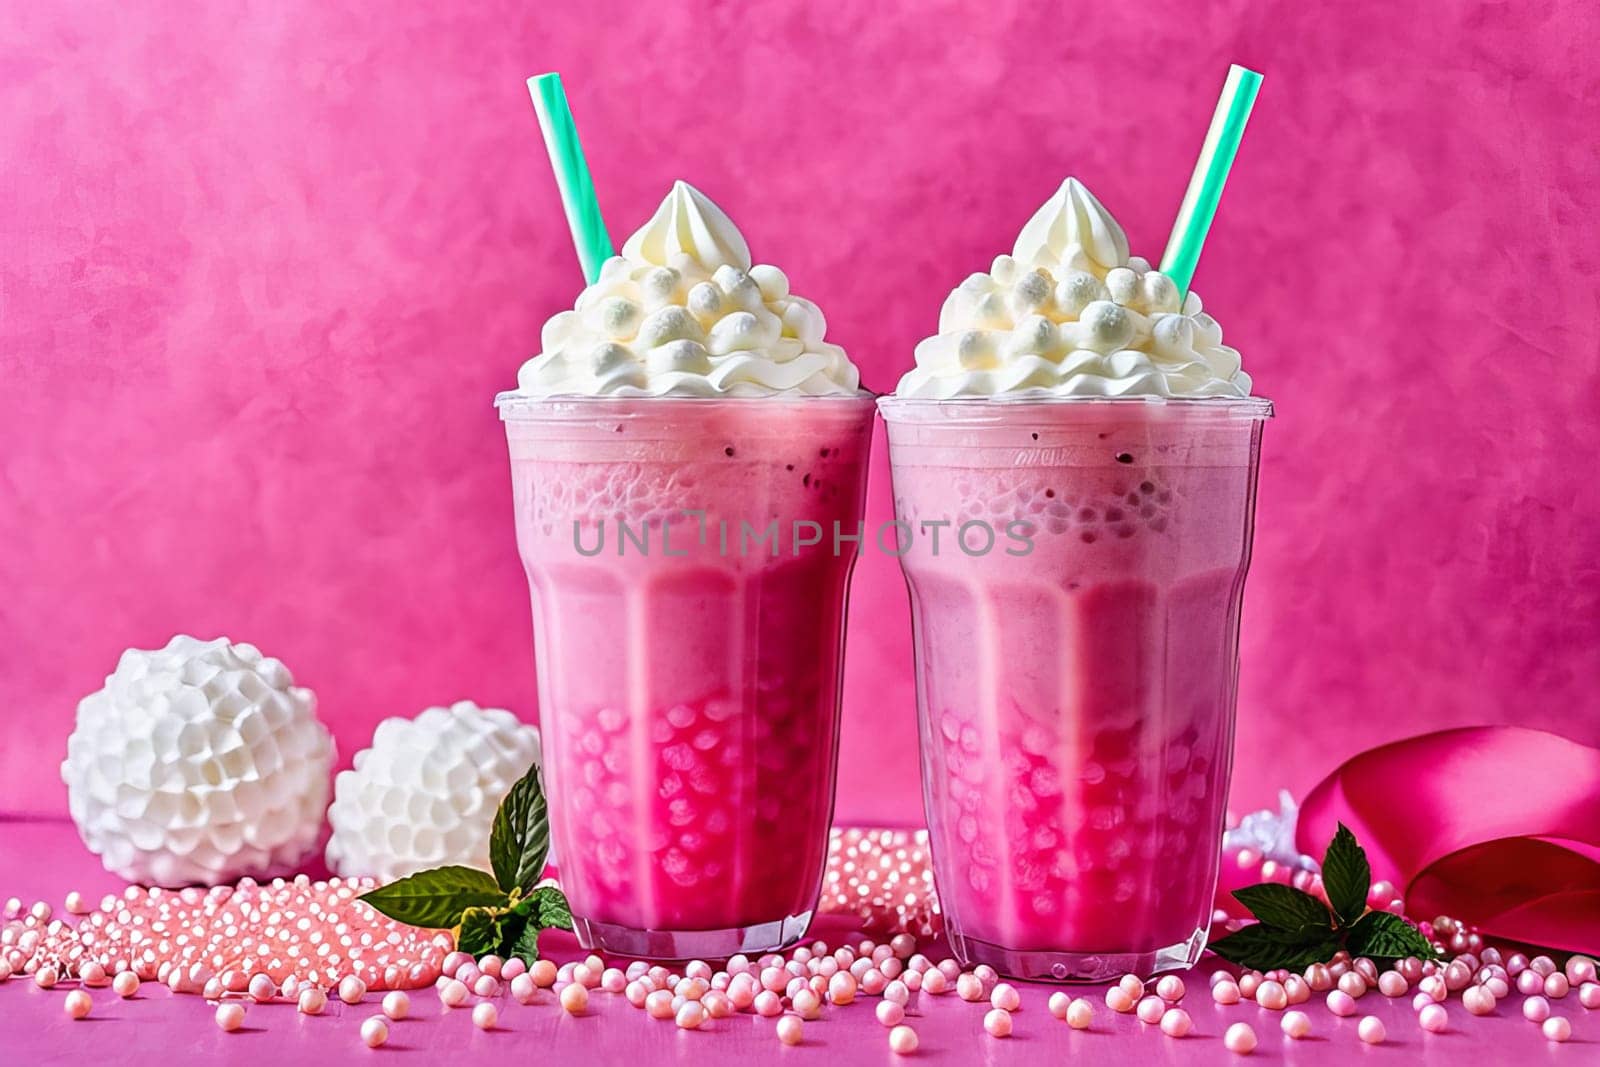 Festive setting with a vibrant pink bubble tea crowned with whipped cream and tapioca pearls. by Annu1tochka